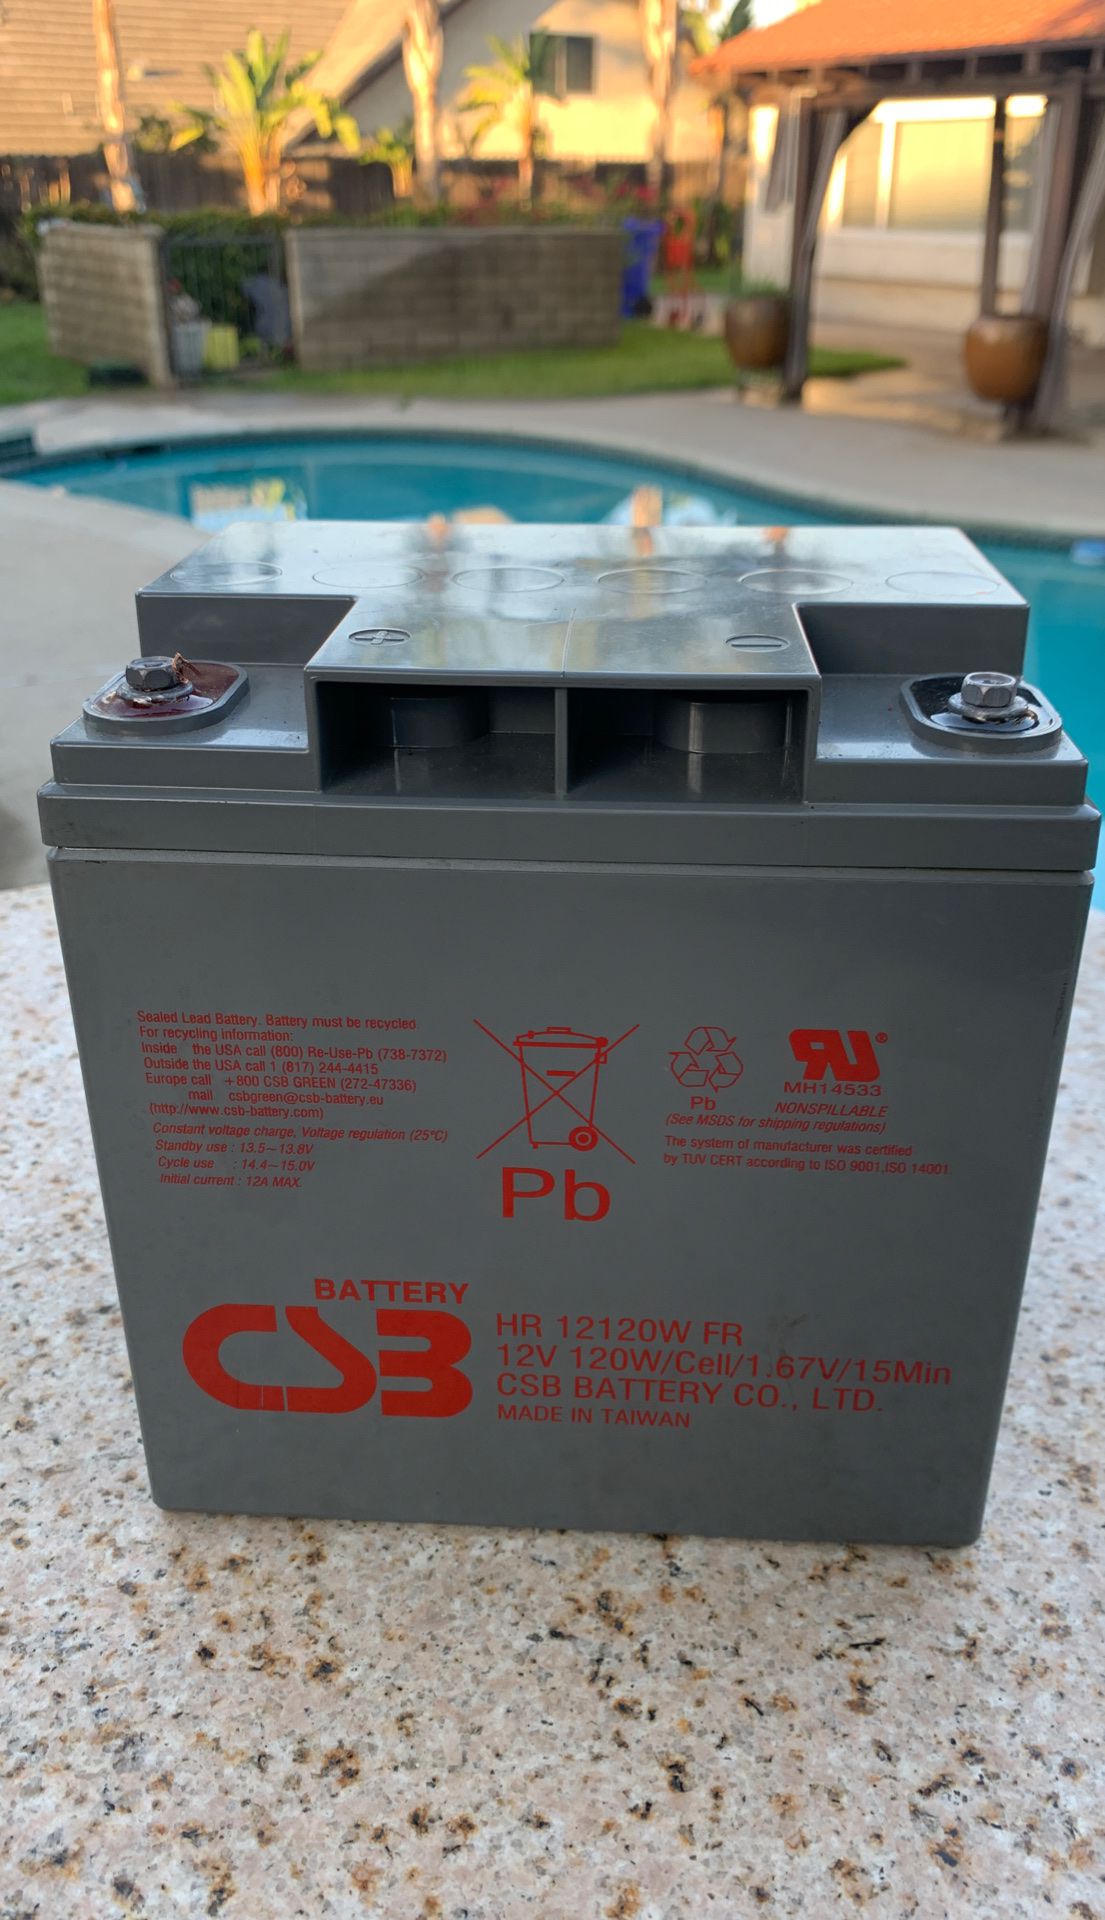 CSB 12 V Battery in new condition. Great for Solar power applications